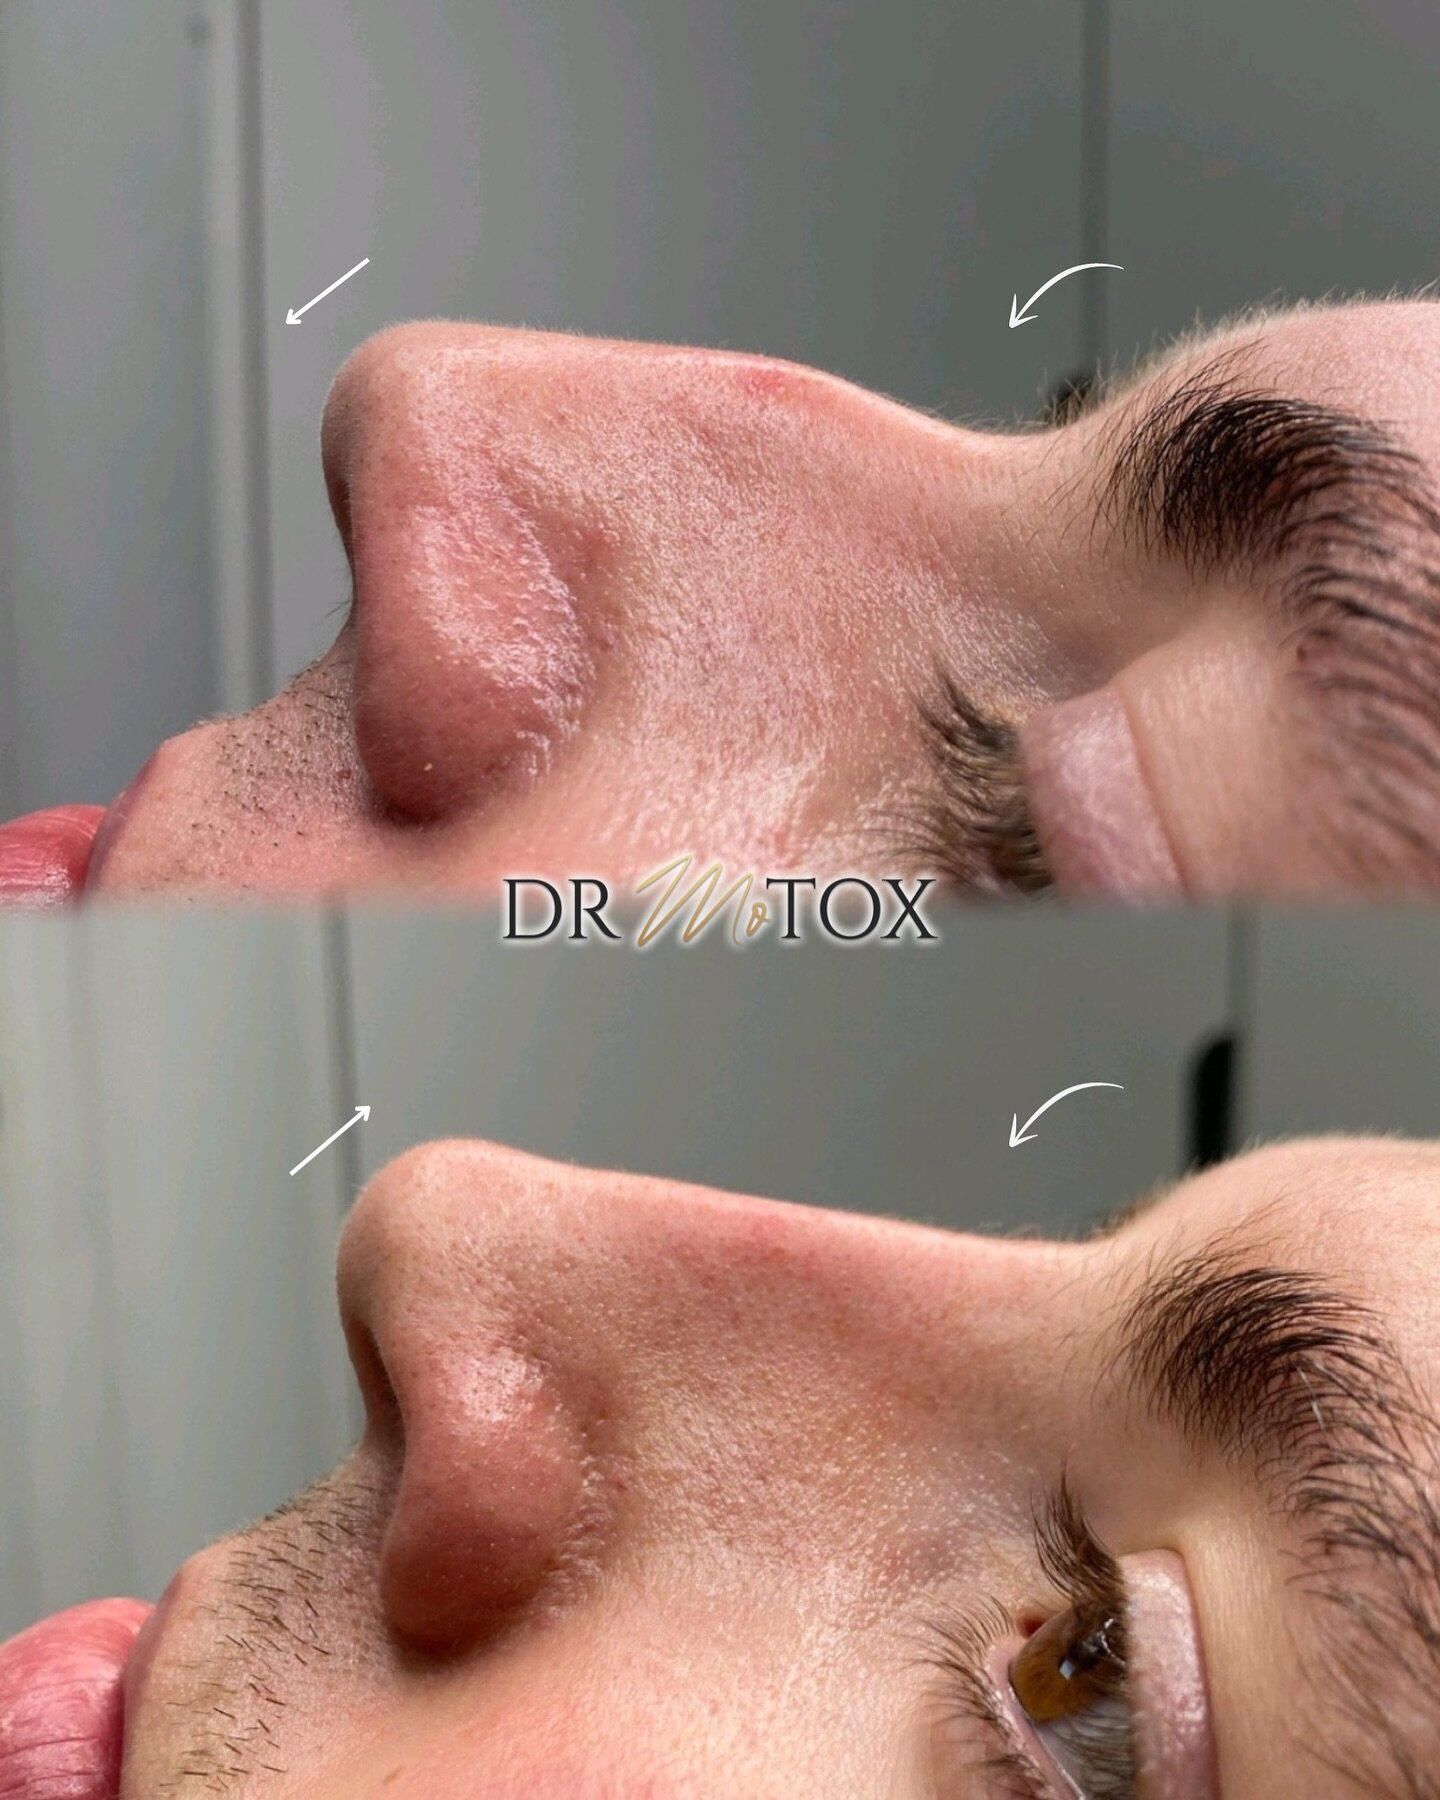 𝐍𝐞𝐰 𝐲𝐞𝐚𝐫, 𝐧𝐞𝐰 𝐧𝐨𝐬𝐞💁🏼&zwj;♀️ If you&rsquo;ve been thinking about booking a Non Surgical Nose Job then 2024 is the year to do it! ⁣
⁣⁣⁣
𝘚𝘢𝘮𝘦 𝘥𝘢𝘺 𝘳𝘦𝘴𝘶𝘭𝘵𝘴, 𝘯𝘰 𝘥𝘰𝘸𝘯𝘵𝘪𝘮𝘦 &amp; 𝘱𝘢𝘪𝘯 𝘧𝘳𝘦𝘦!⁣⁣⁣
⁣⁣⁣⁣⁣⁣⁣⁣
𝘙𝘦𝘴𝘶?